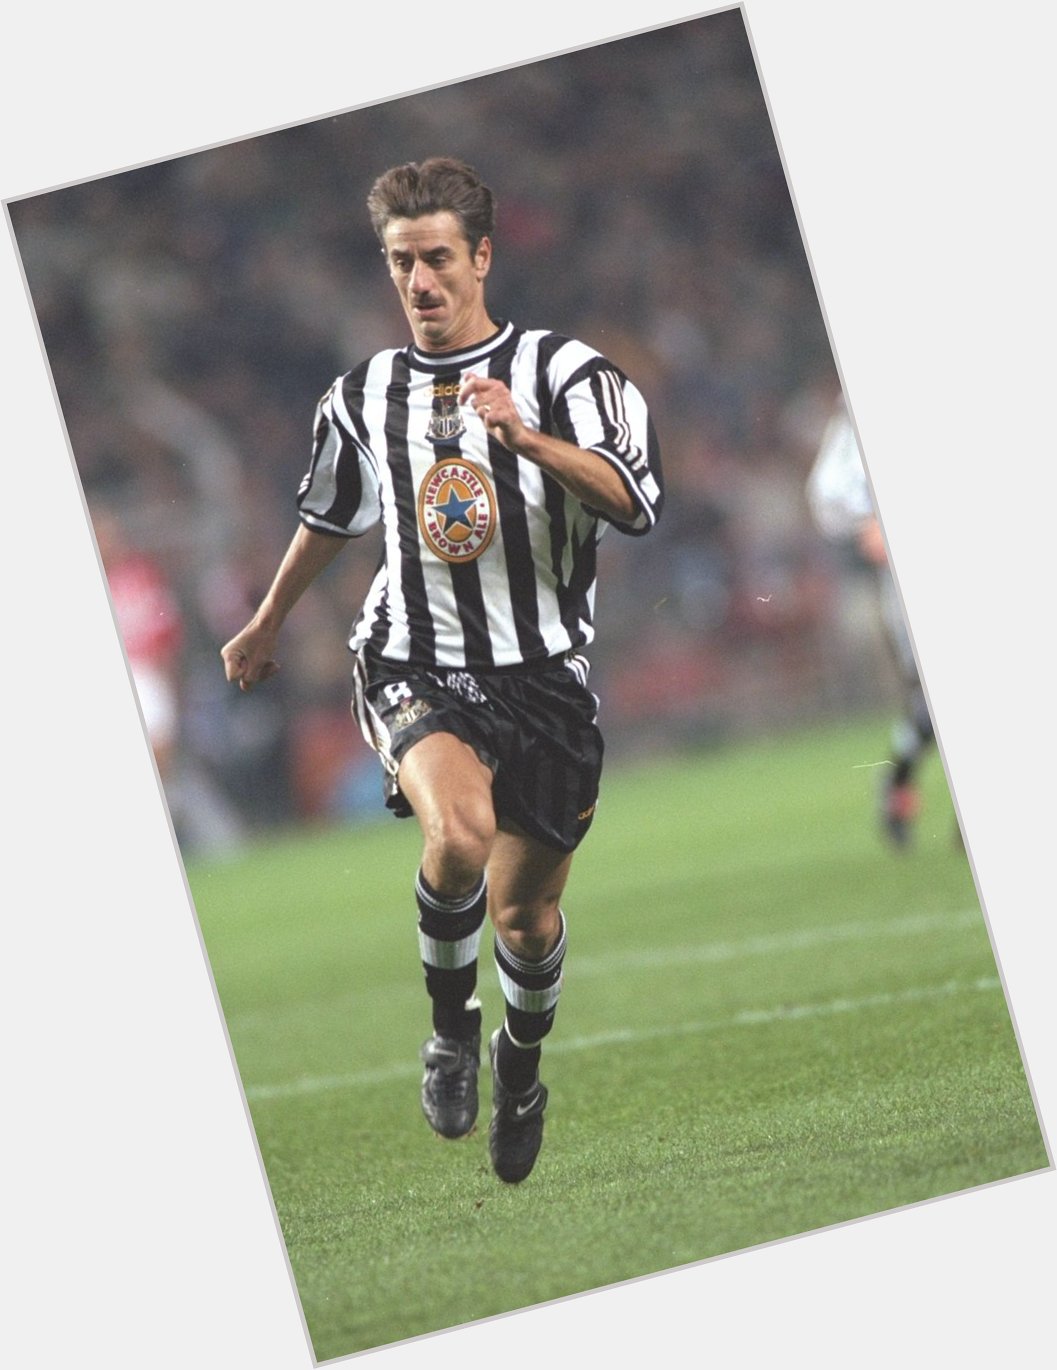  Happy birthday to former forward Ian Rush.

Sum up his brief spell on Tyneside in 3 words. 